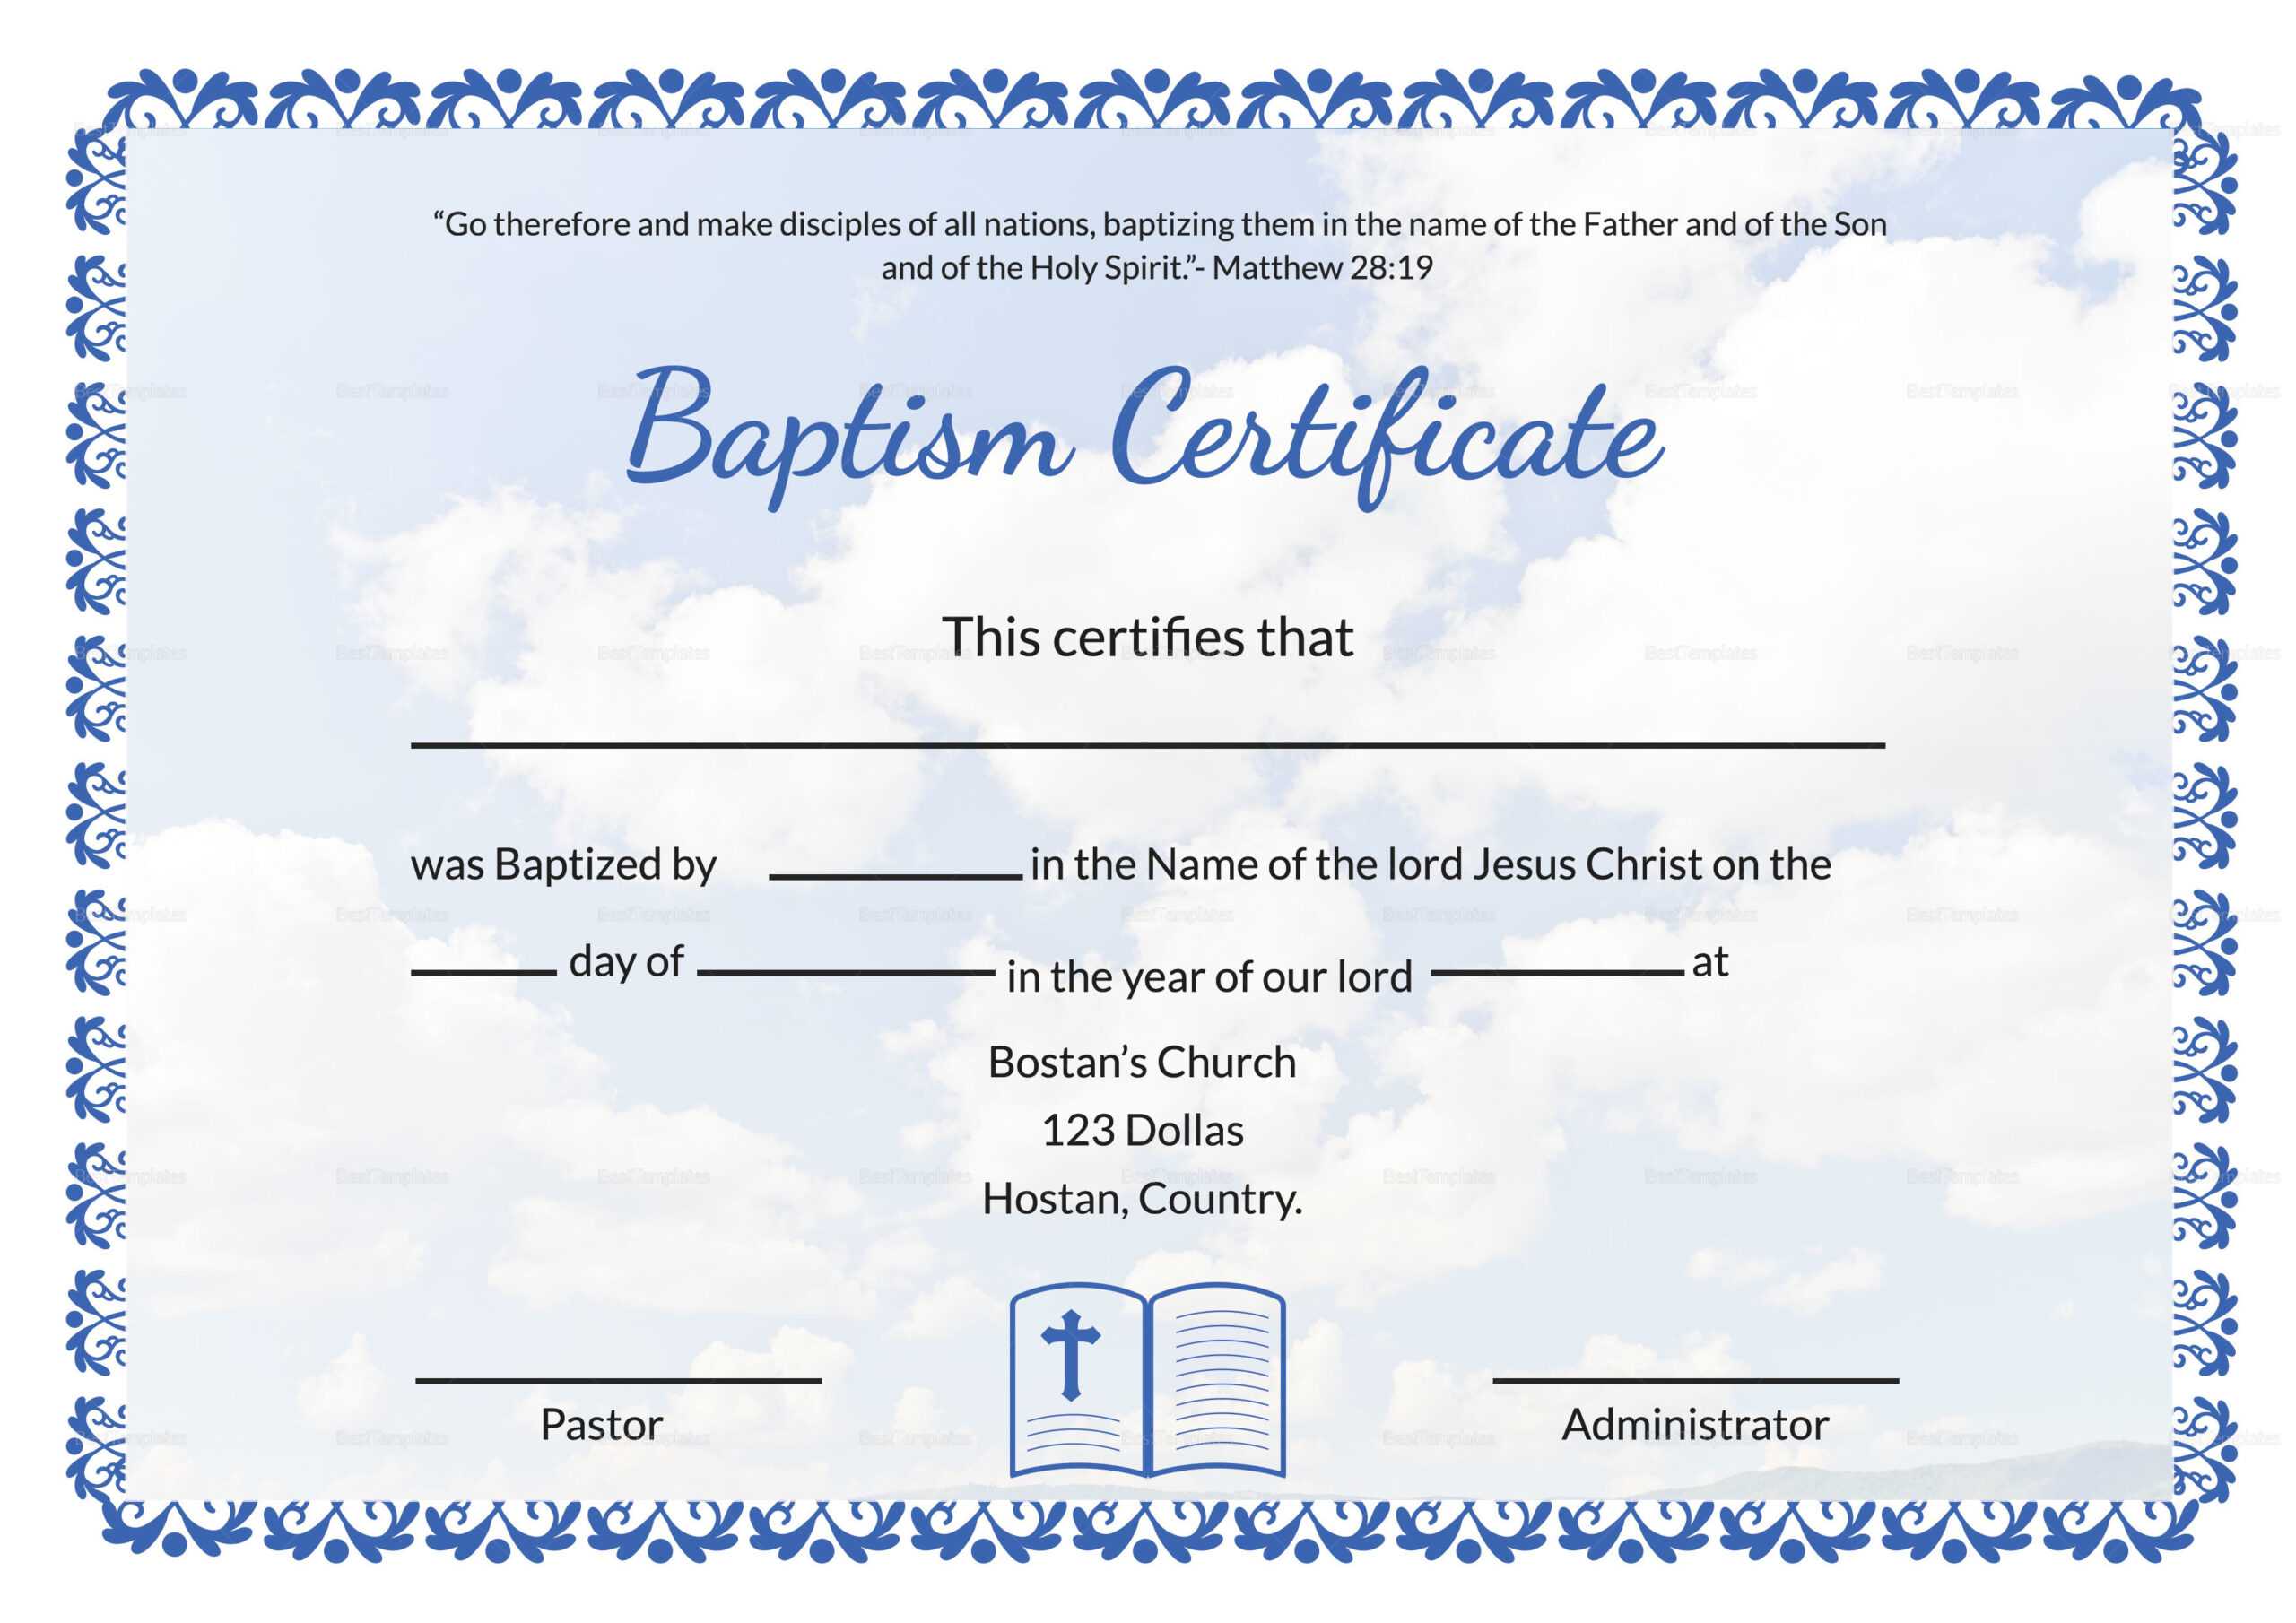 007 Certificate Of Baptism Template Ideas Unique Catholic Throughout Christian Certificate Template